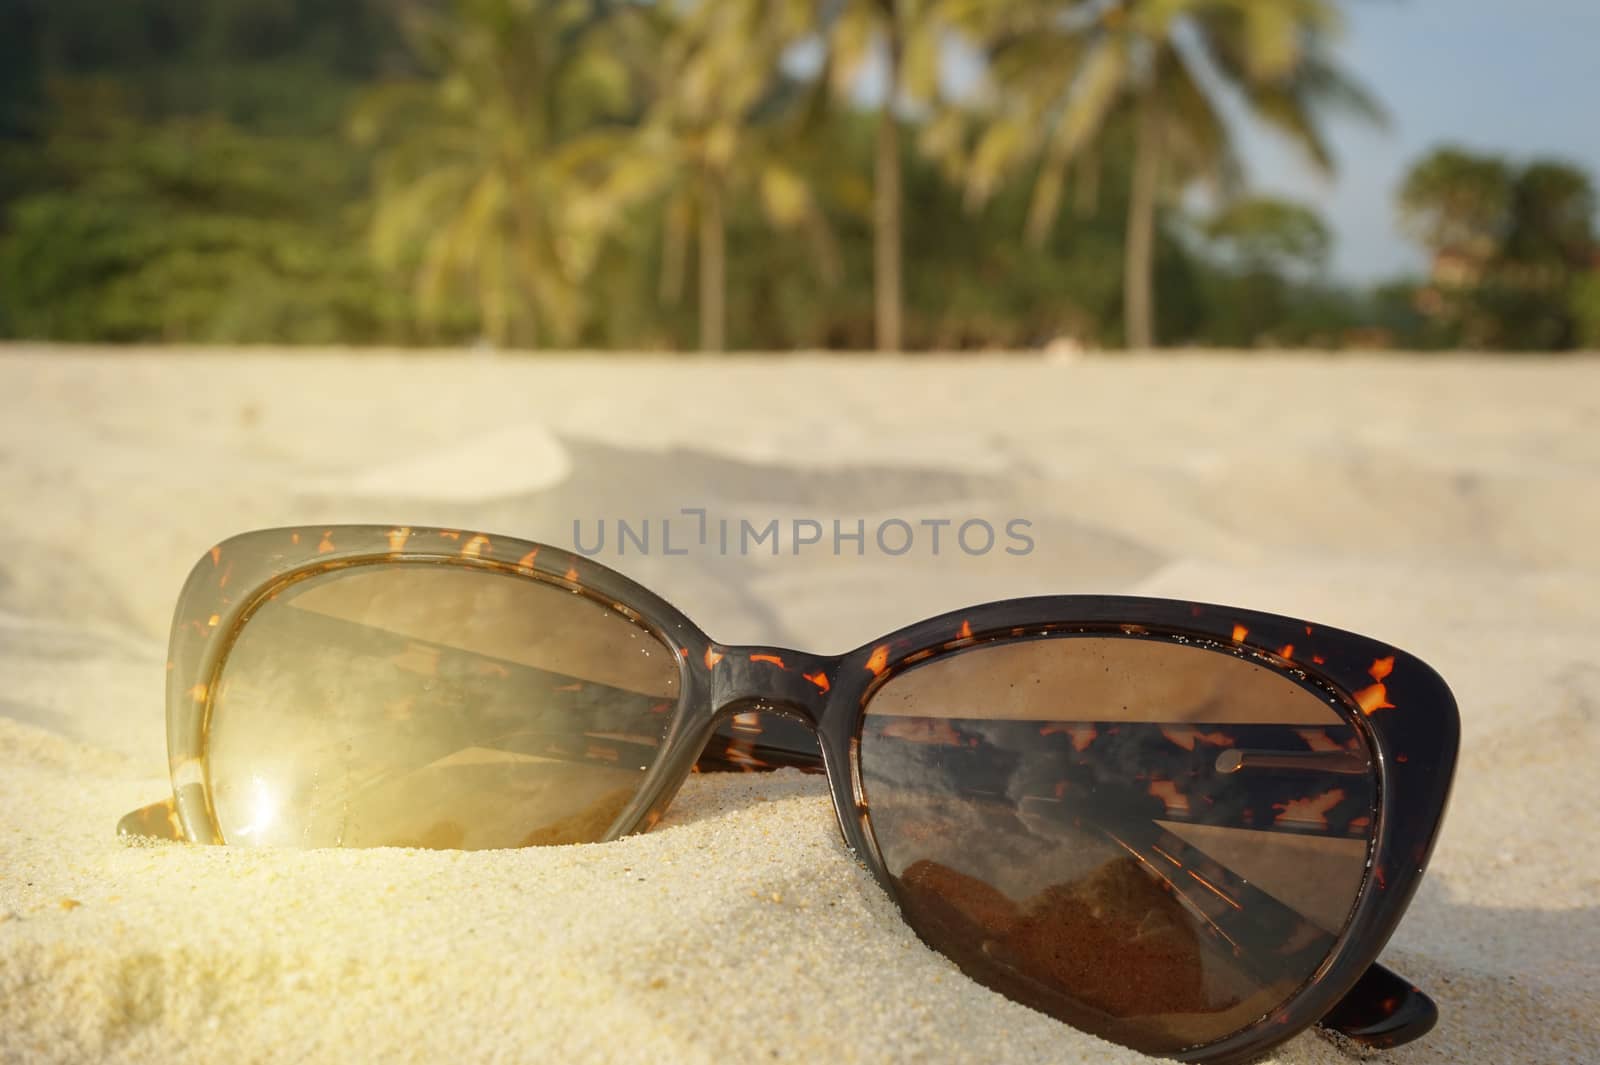 The concept of beach holidays and travel. Brown sunglasses on the sand on the beach, sunlight, place for text.